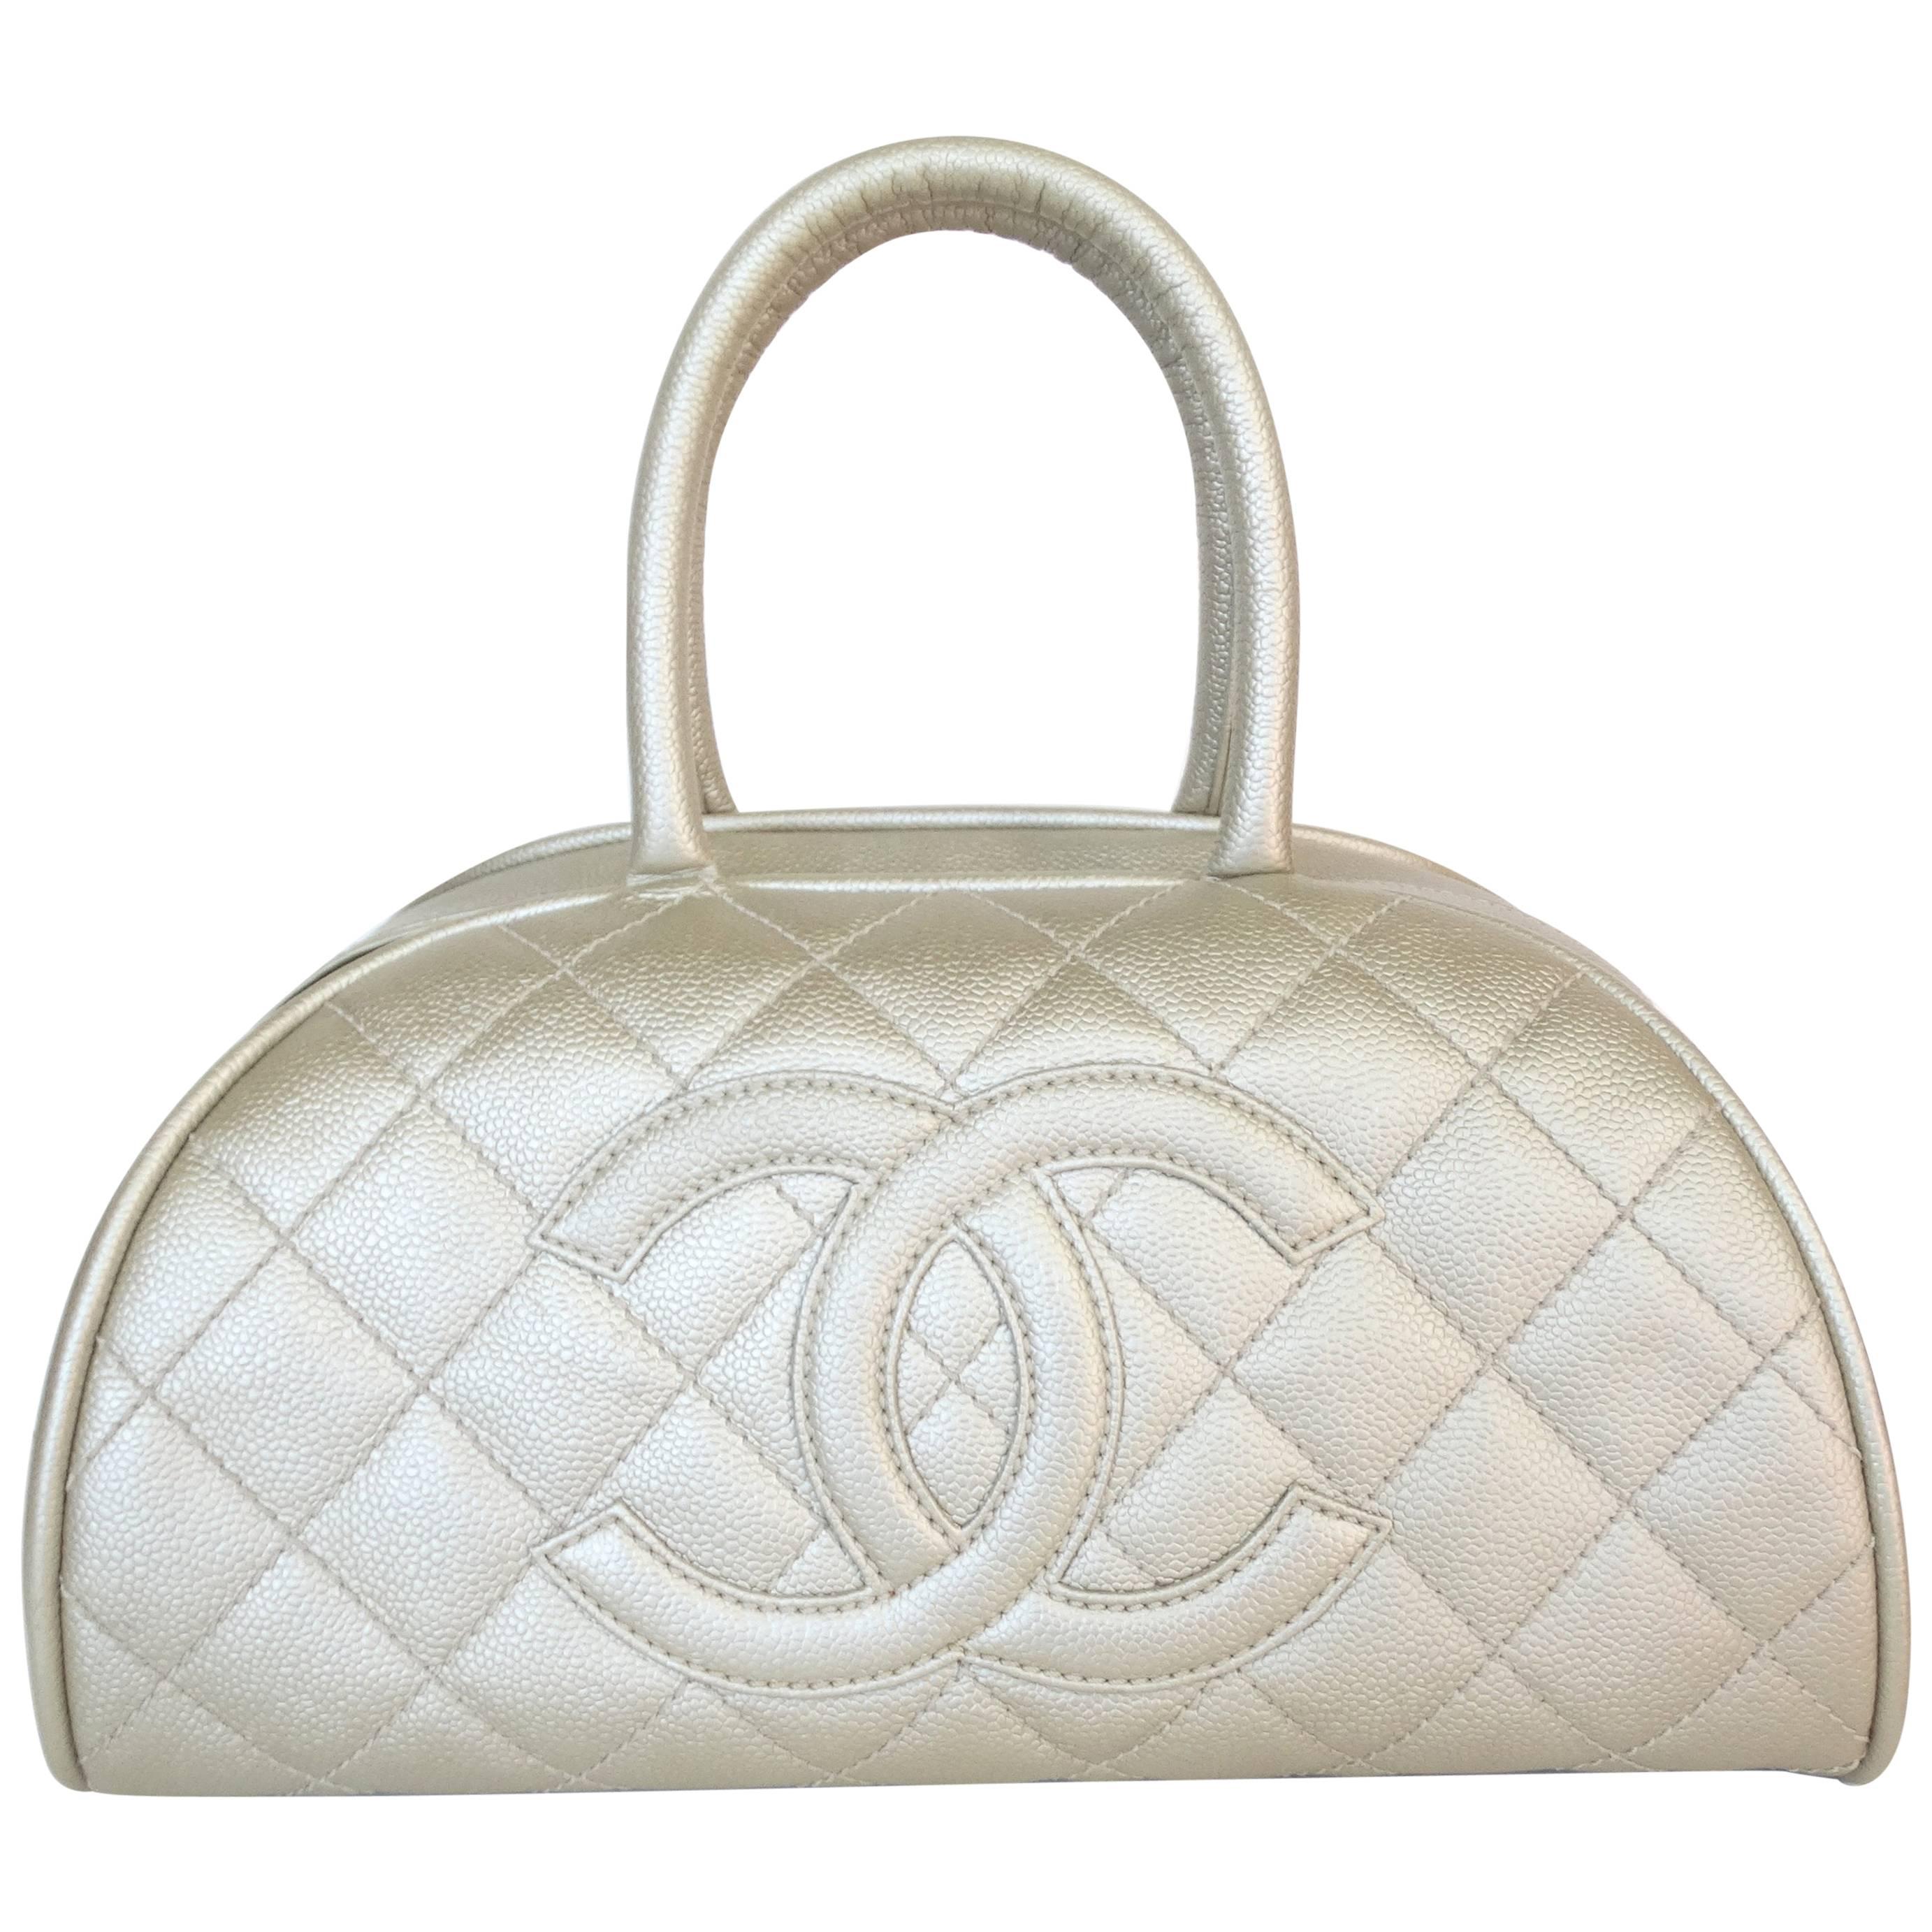 Chanel Metallic Quilted Caviar Bowler Bag